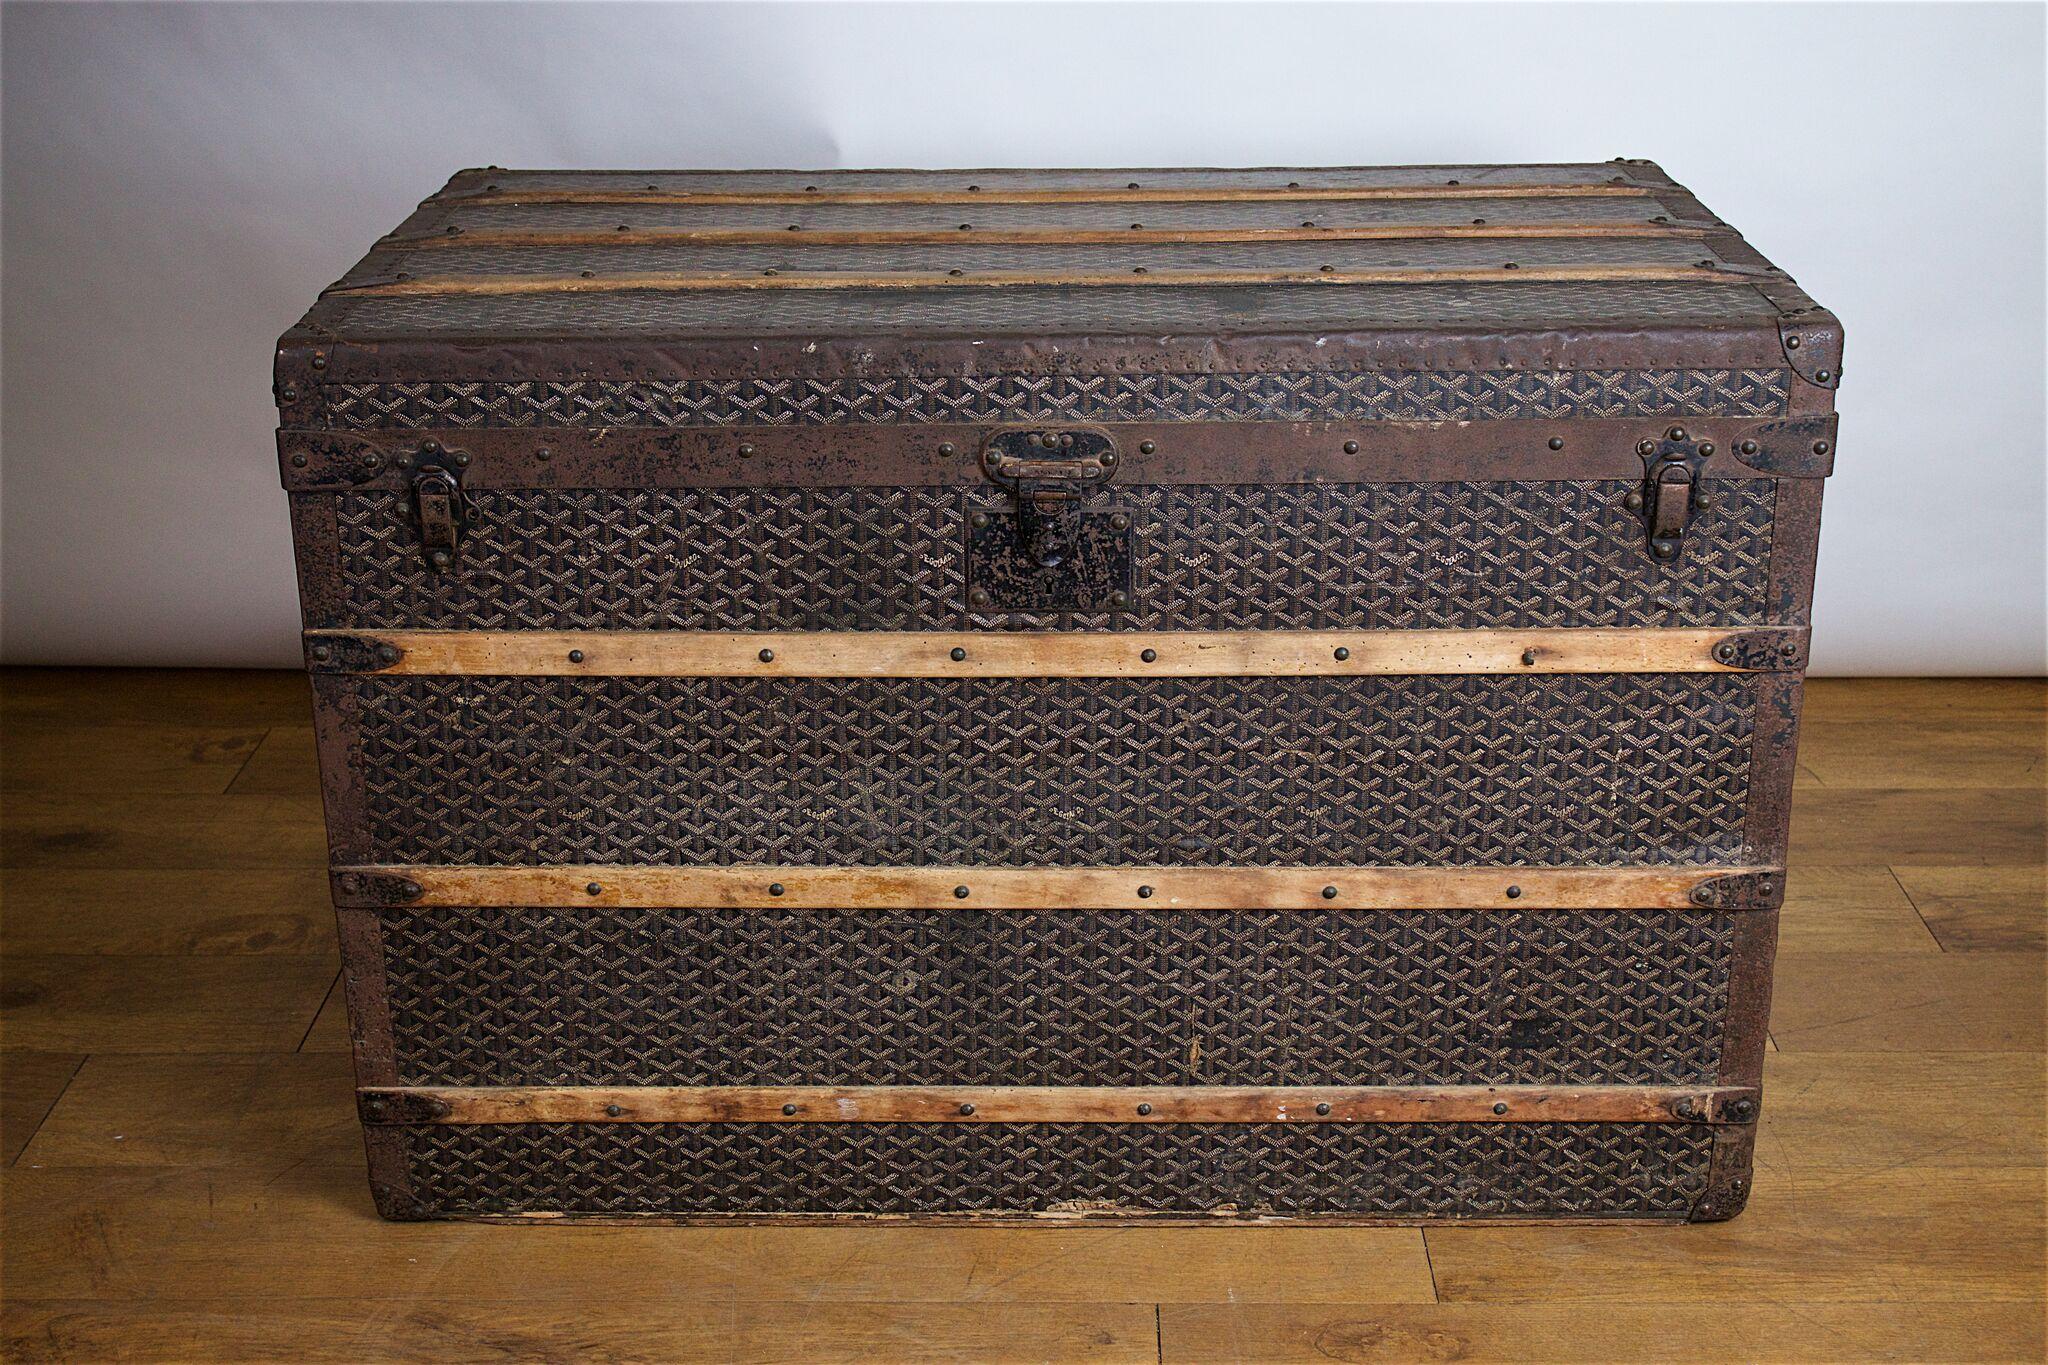 Early 20th century Goyard steamer trunk, complete with original interior carrying frame. Features distinctive Goyard chevron pattern.